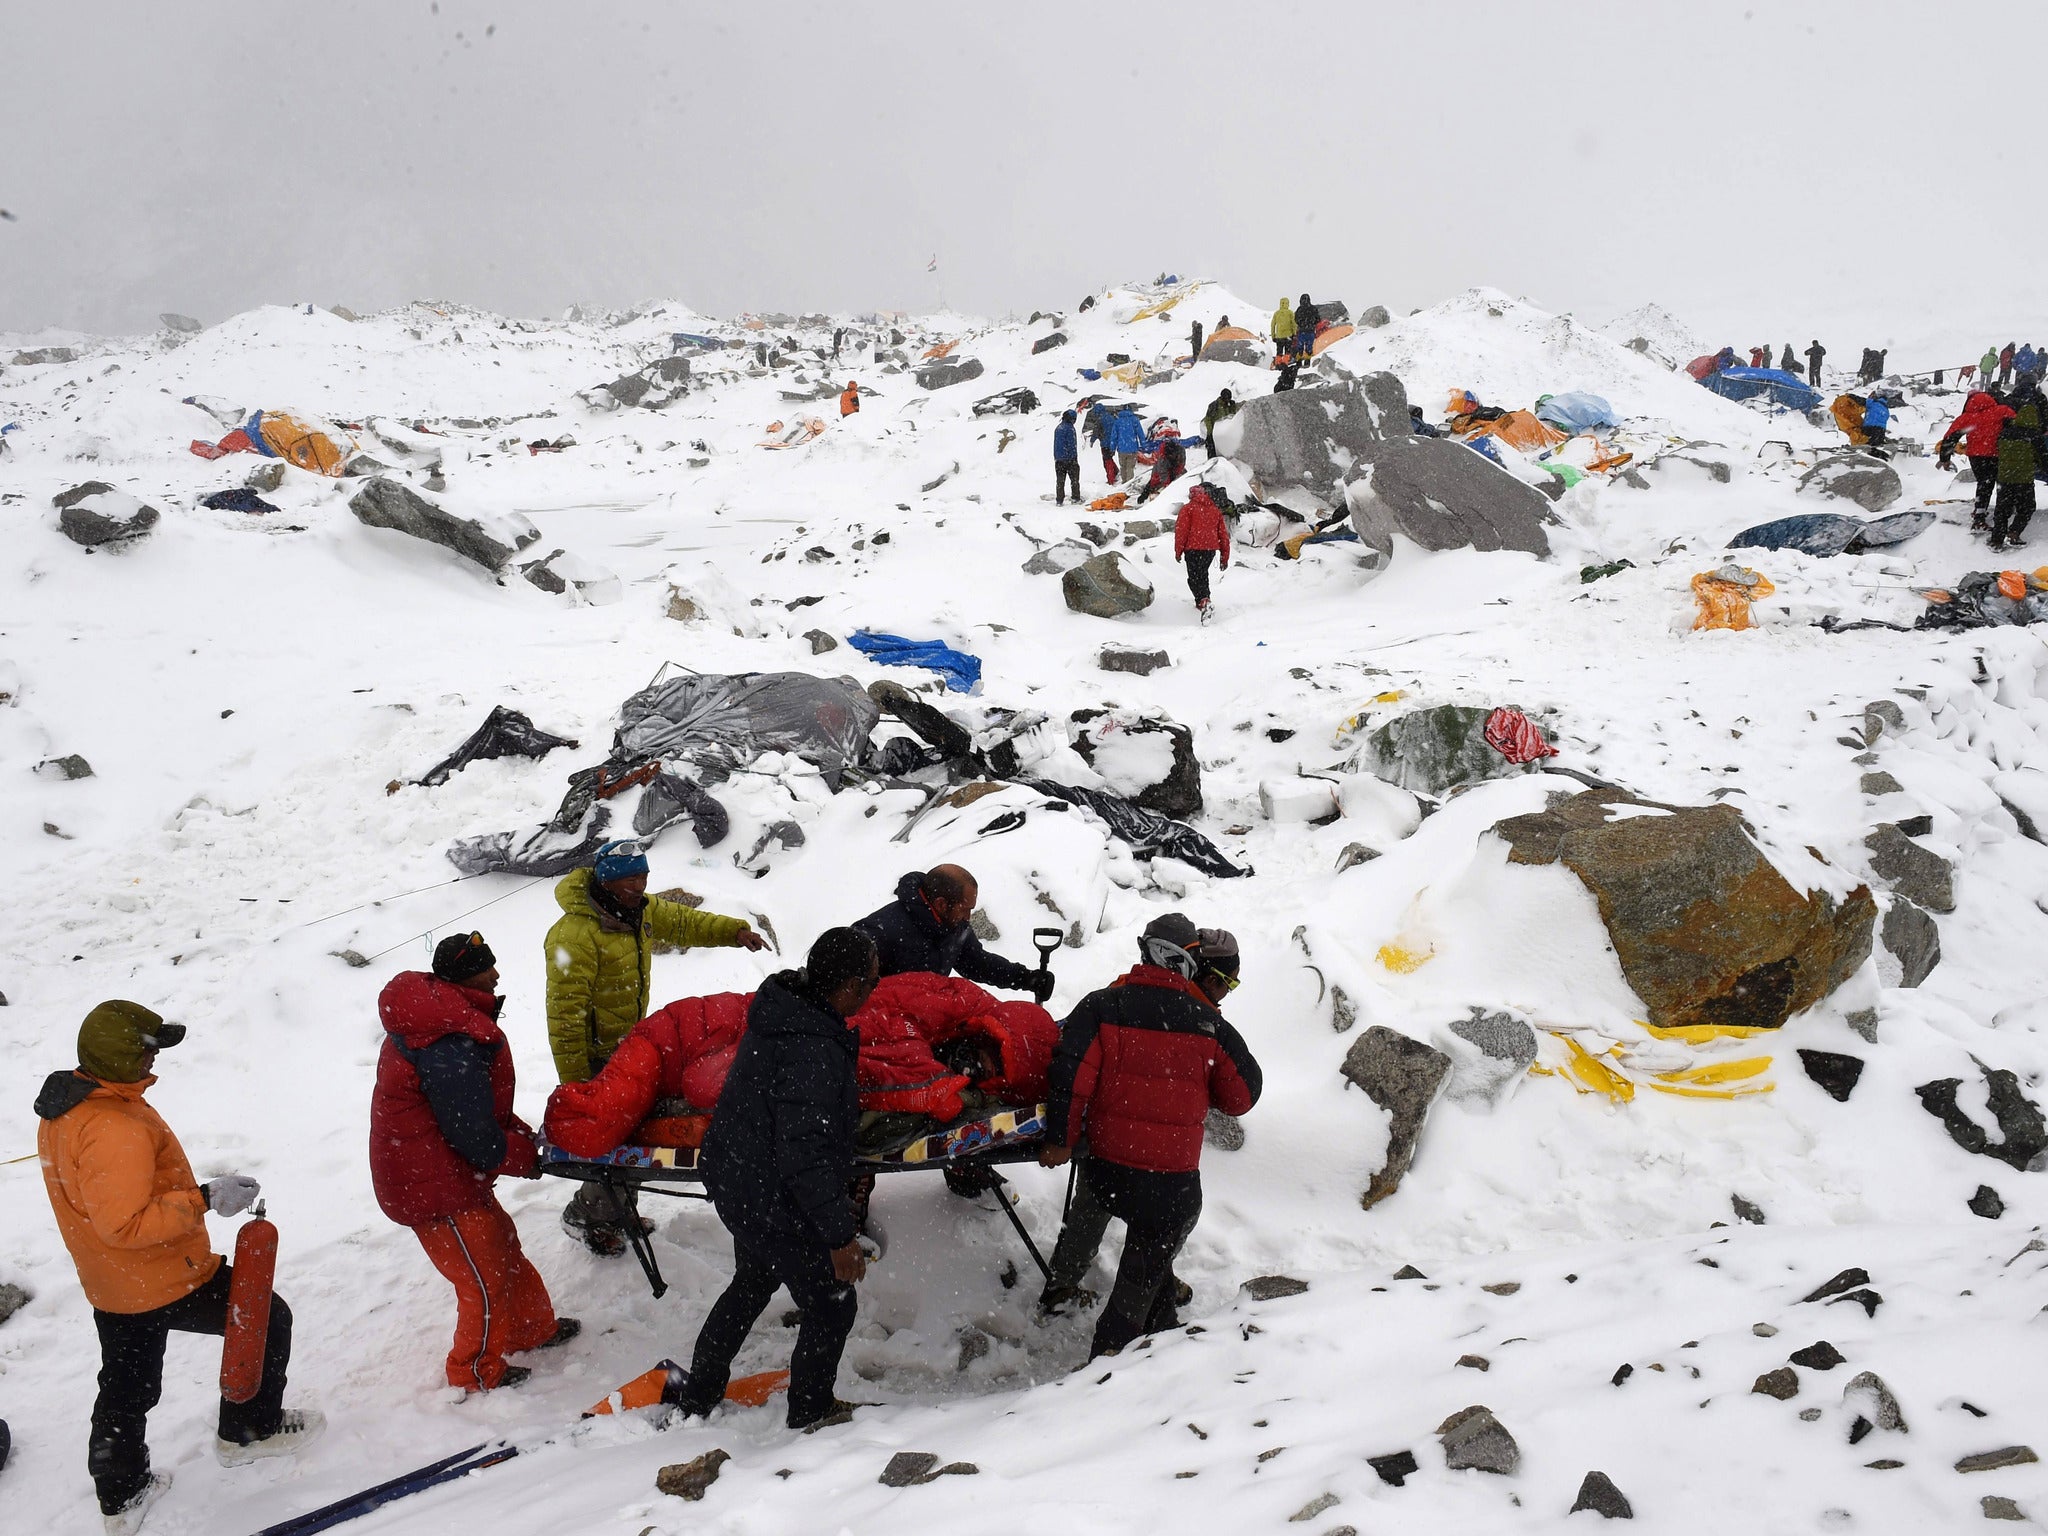 At least 17 people died on Everest after an avalanche struck, triggered by the earthquake (Getty)